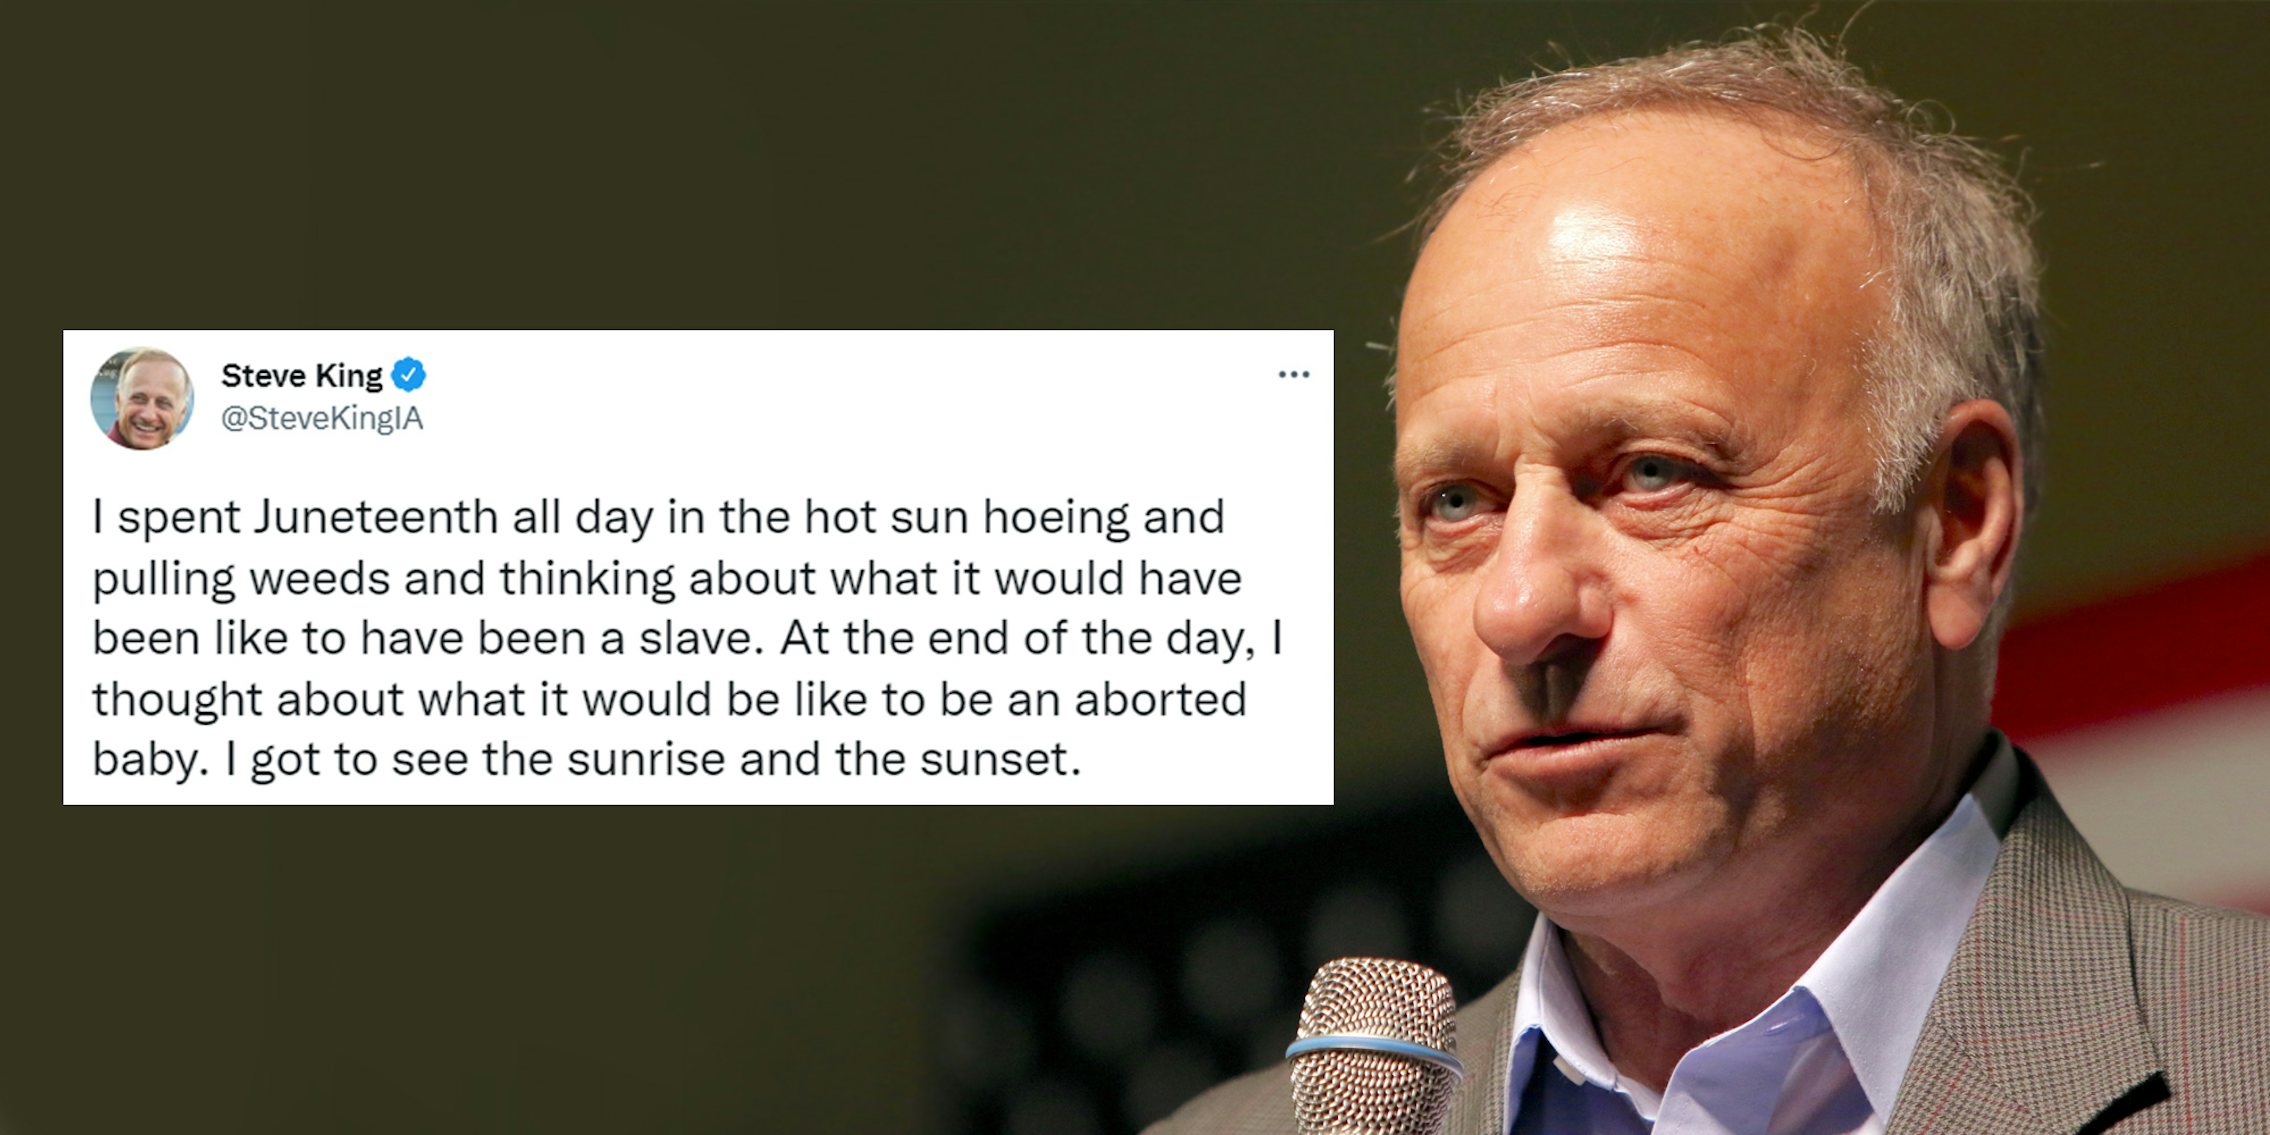 Steve King on right holding microphone over blurred American flag and olive green background with tweet by Steve King on left caption 'I spent Juneteenth all day in the hot sun hoeing and pulling weeds and thinking about what it would have been like to have been a slave. At the end of the day, I thought about what it would be like to be an aborted baby. I got to see the sunrise and the sunset.'